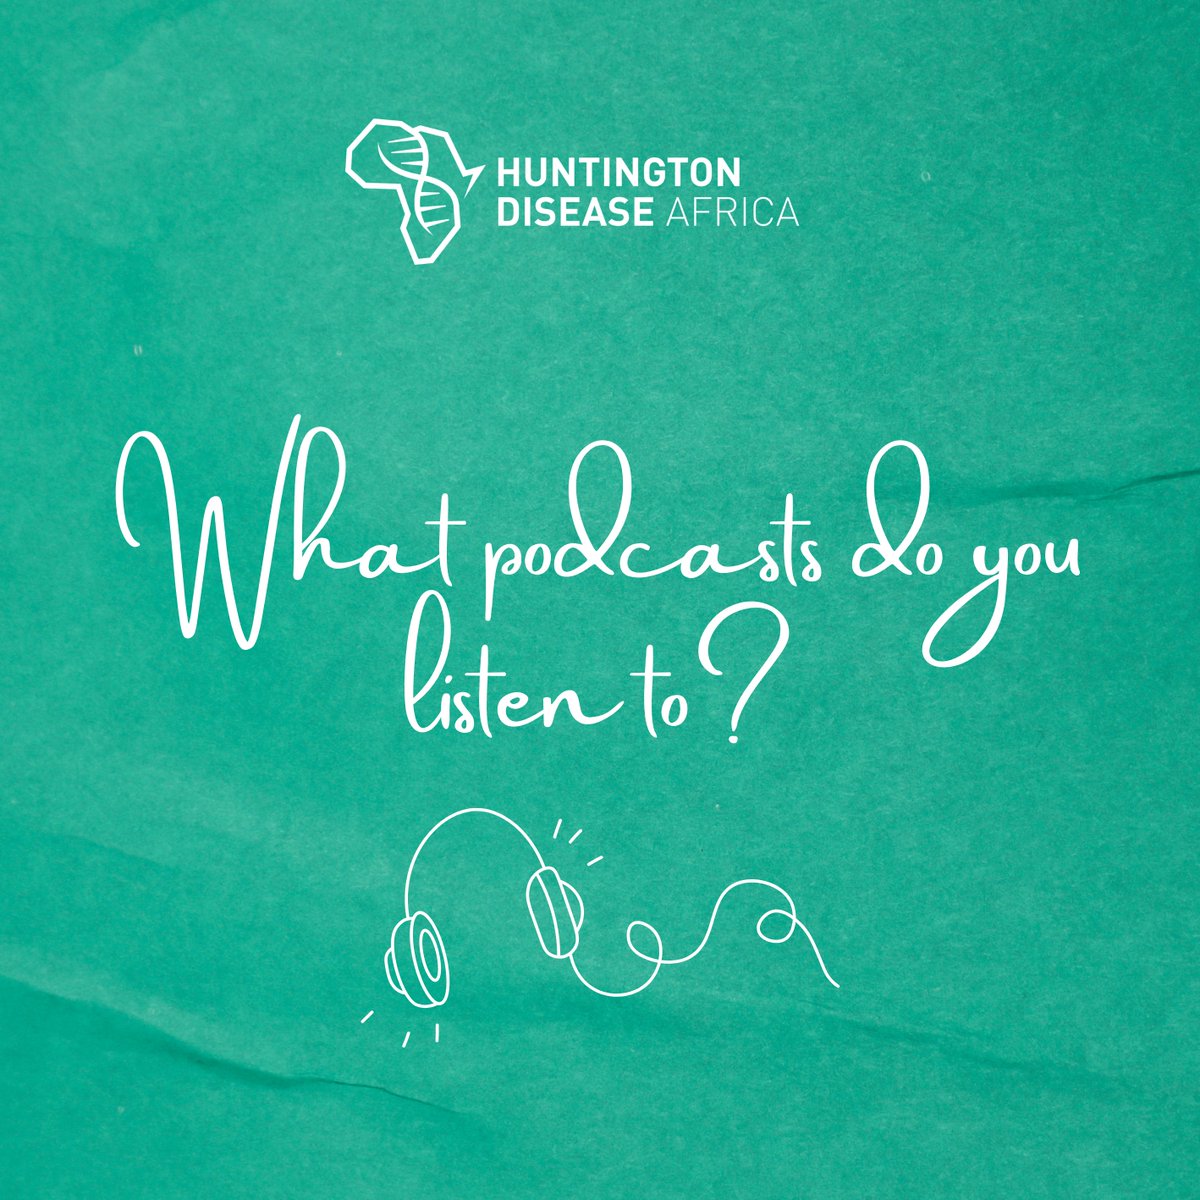 We are not done yet - Here are a couple more!

What other podcasts do you listen to?
#HuntingtonsDiseaseAwareness #PodcastCommunity #HDAfrica